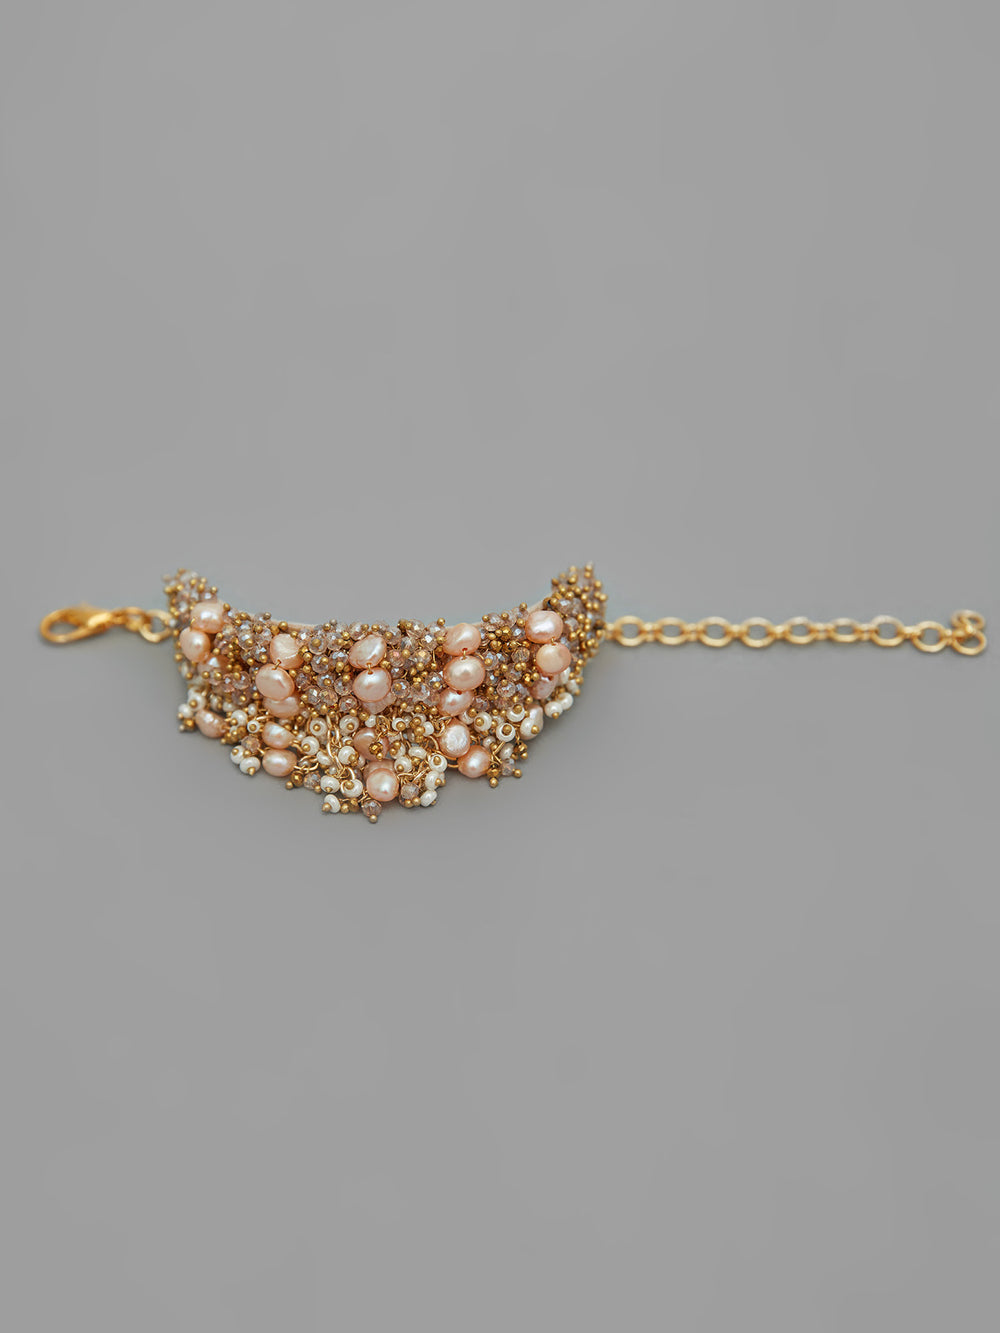 Amama,Contemporary Peach Pearl Studded Bracelet With Gold Beads